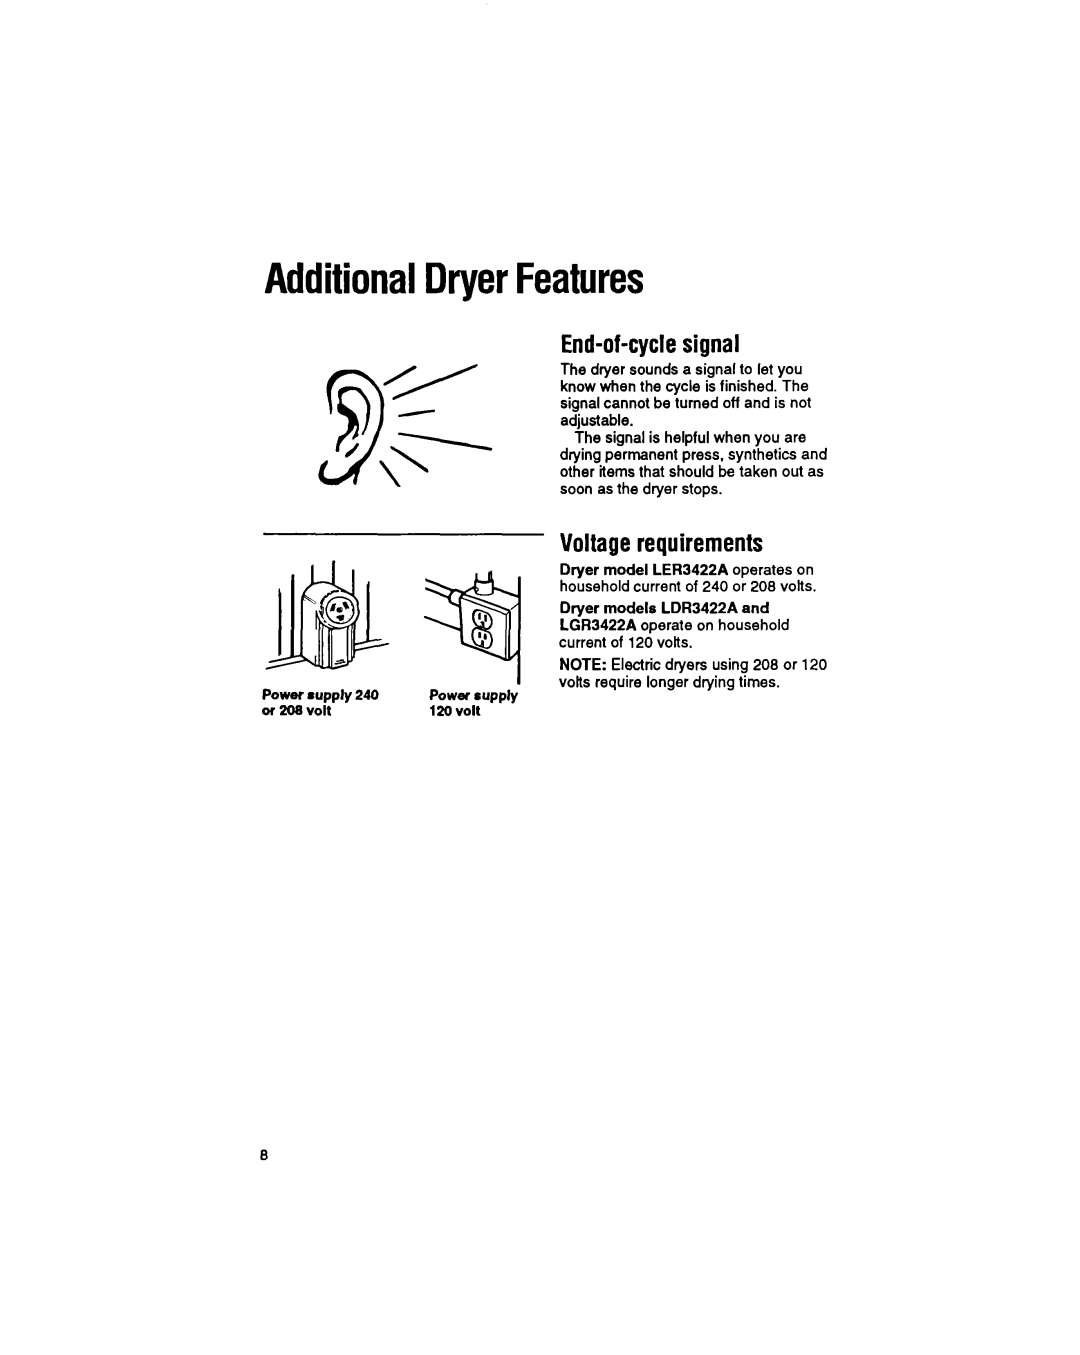 Whirlpool LGR3422A, LDR3422A manual AdditionalDryerFeatures, End-of-cyclesignal, Voltagerequirements, ‘/ 3P/\\= 